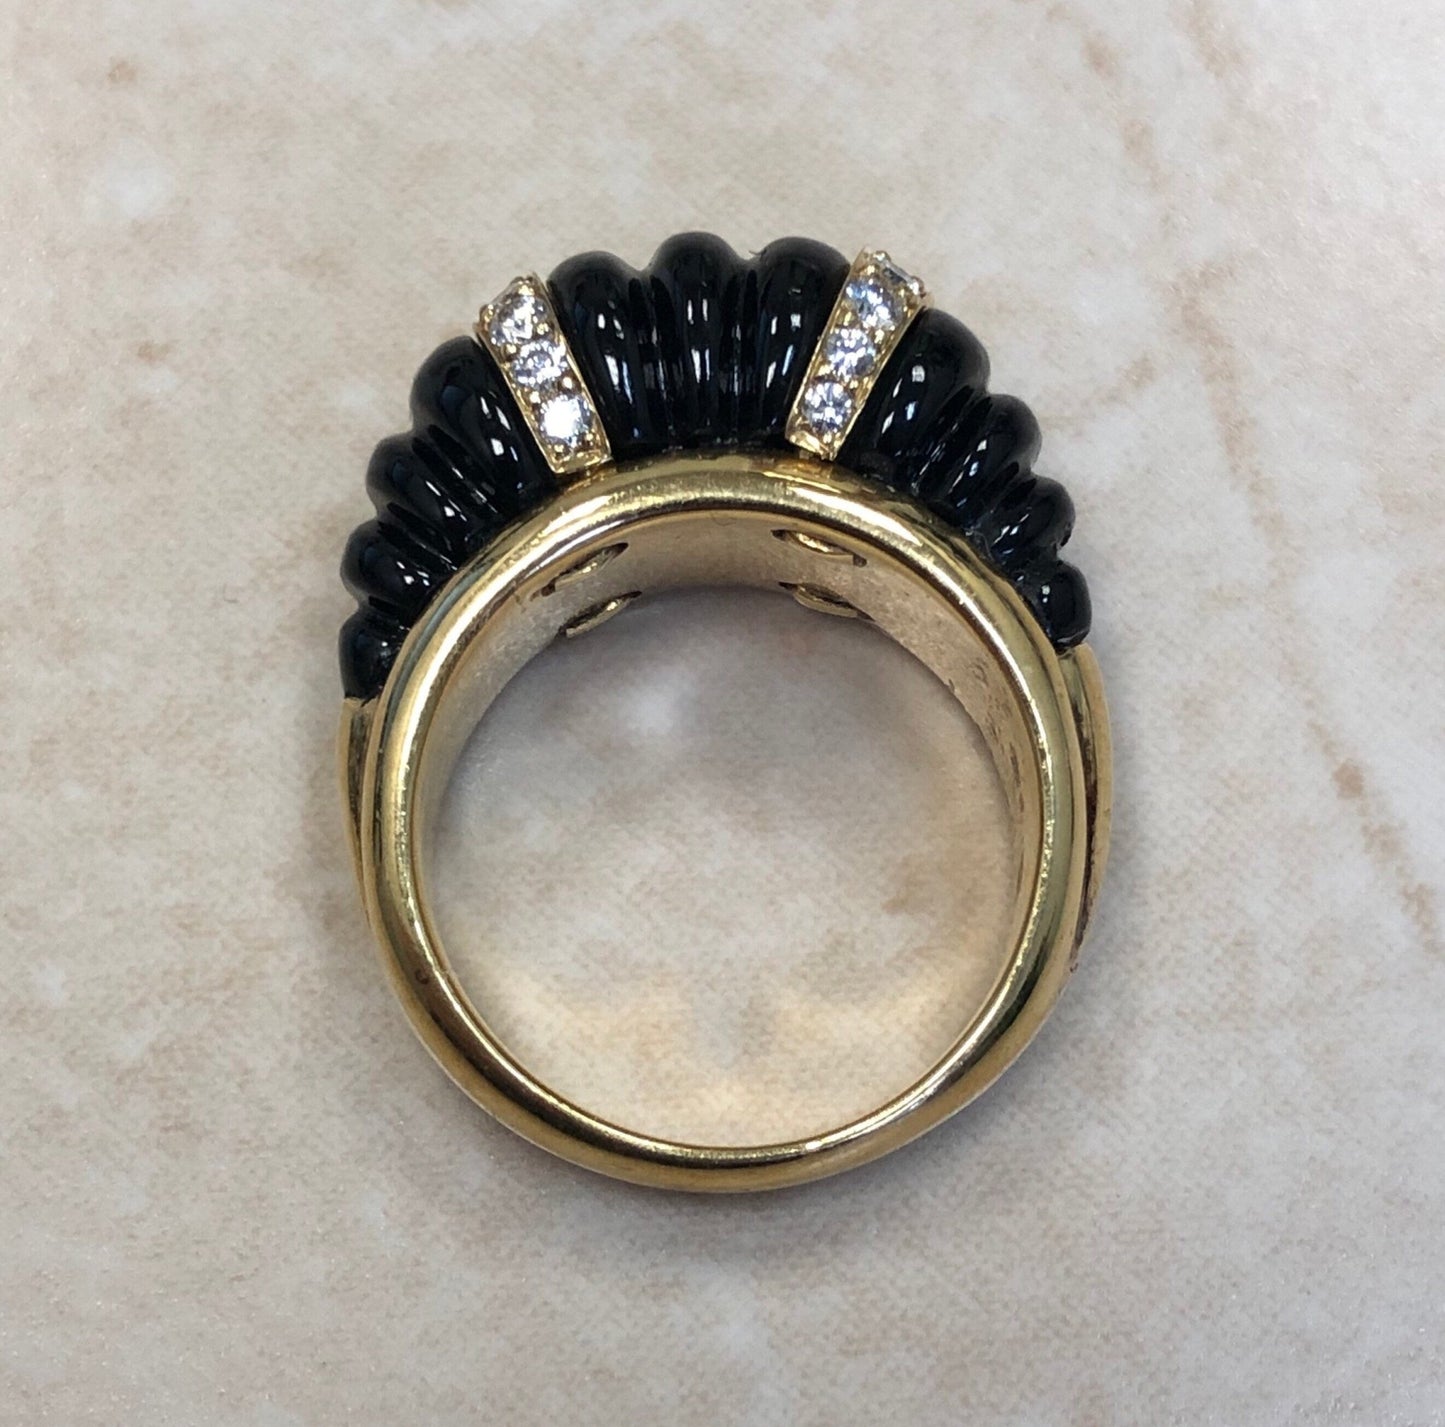 Vintage 18K Black Onyx & Diamond Ring - Cocktail Ring - Yellow Gold - Signed Carvin French Jewelers